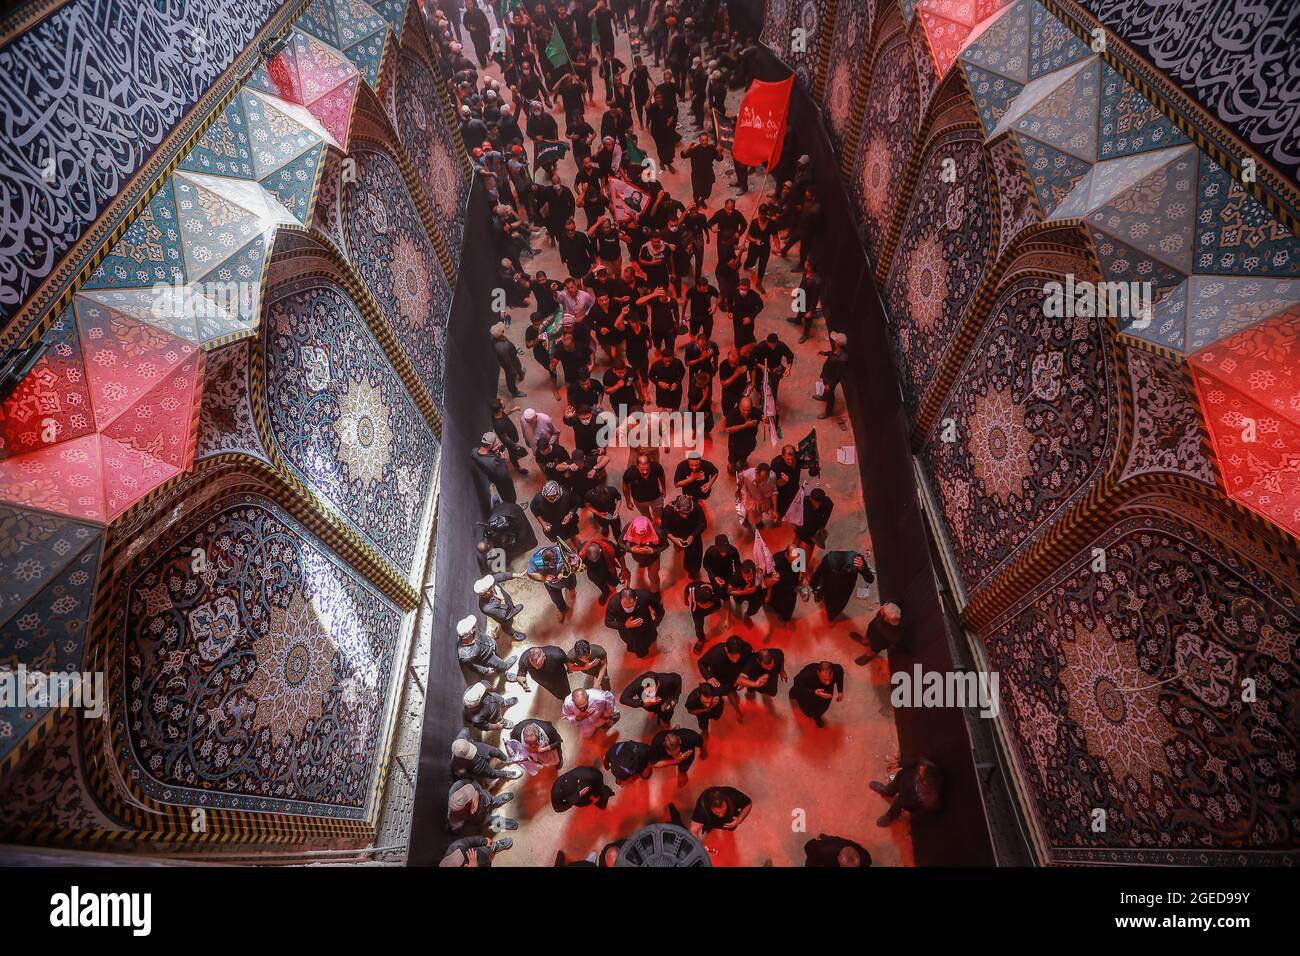 19 August 2021, Iraq, Karbala: People take part in the mourning procession, the Million Run of Tuwairej, one of the well-known Hussainiya rituals practised by the Shiites at the Imam Abbas shrine in Iraq's holy city of Karbala on Ashura Day on the 10th of Muharram, the first month of the Islamic calendar. Muharram is considered a month of mourning and remembrance for Shiite Muslims around the world, in which they commemorate the martyrdom of the grandson of the Islamic prophet Mohammad, Husayn ibn Ali, who was killed in the 7th century Battle of Karbala. Photo: Ameer Al Mohammedaw/dpa Stock Photo